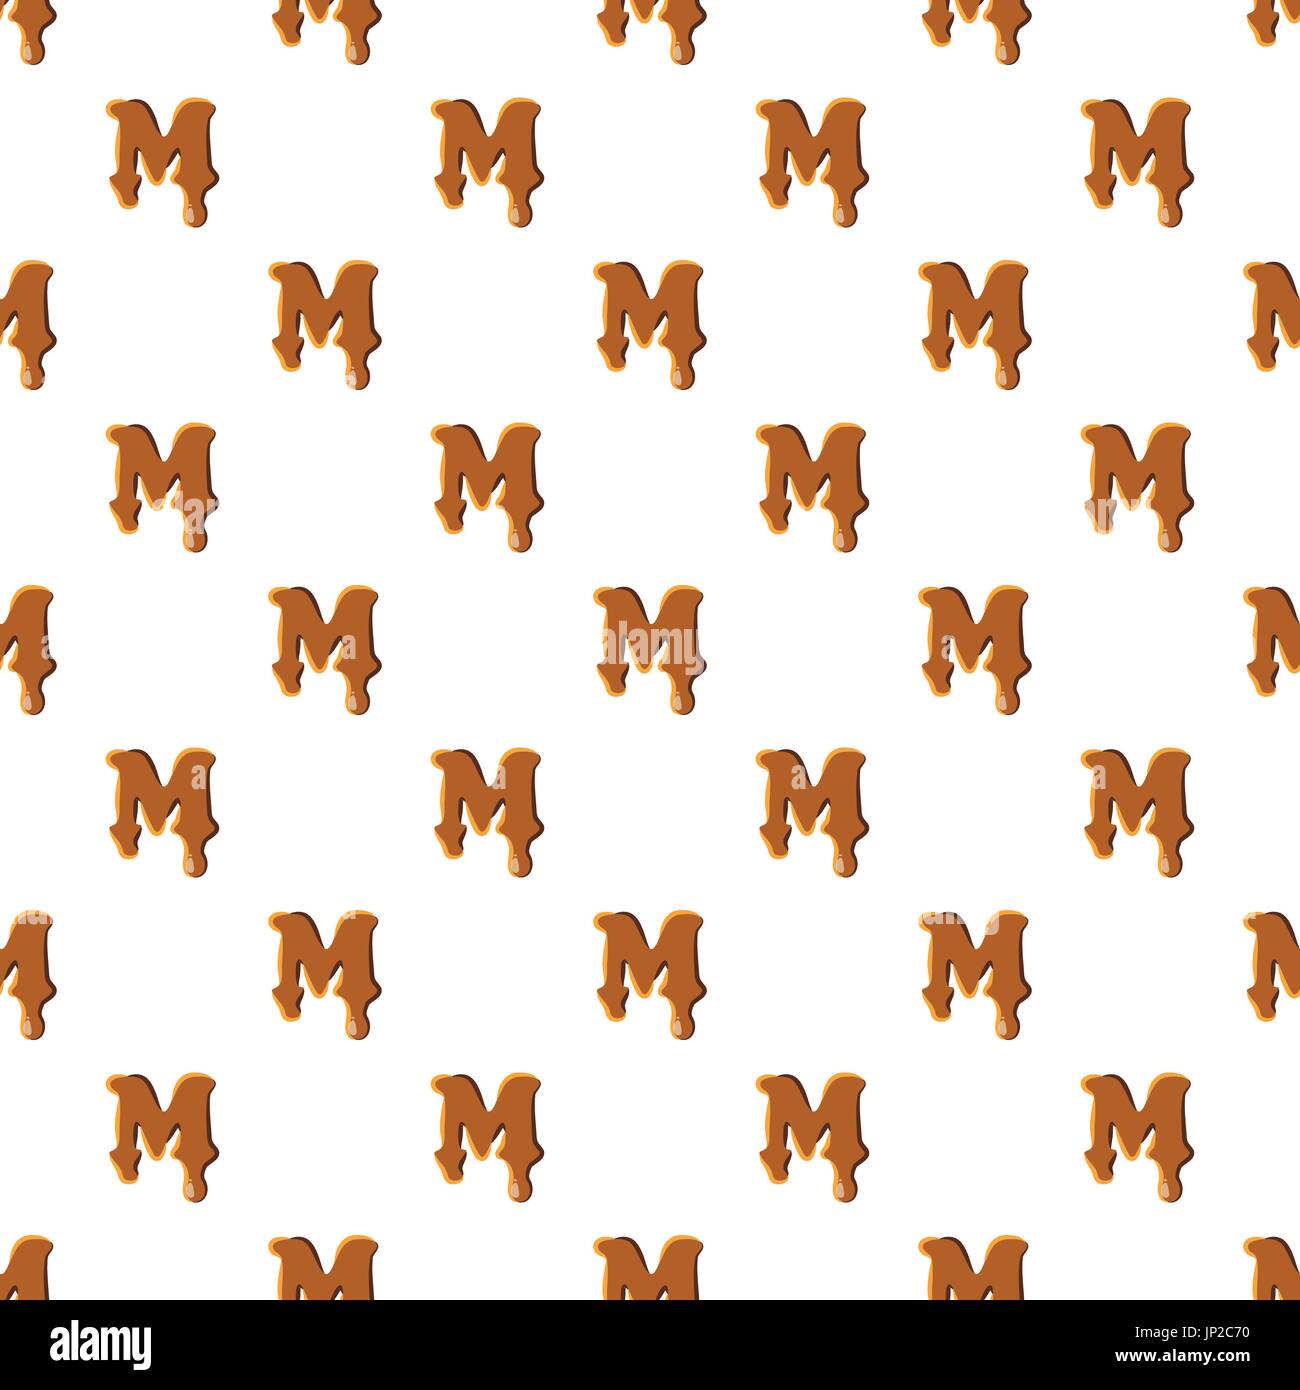 Letter M from caramel pattern seamless repeat in cartoon style vector illustration Stock Vector